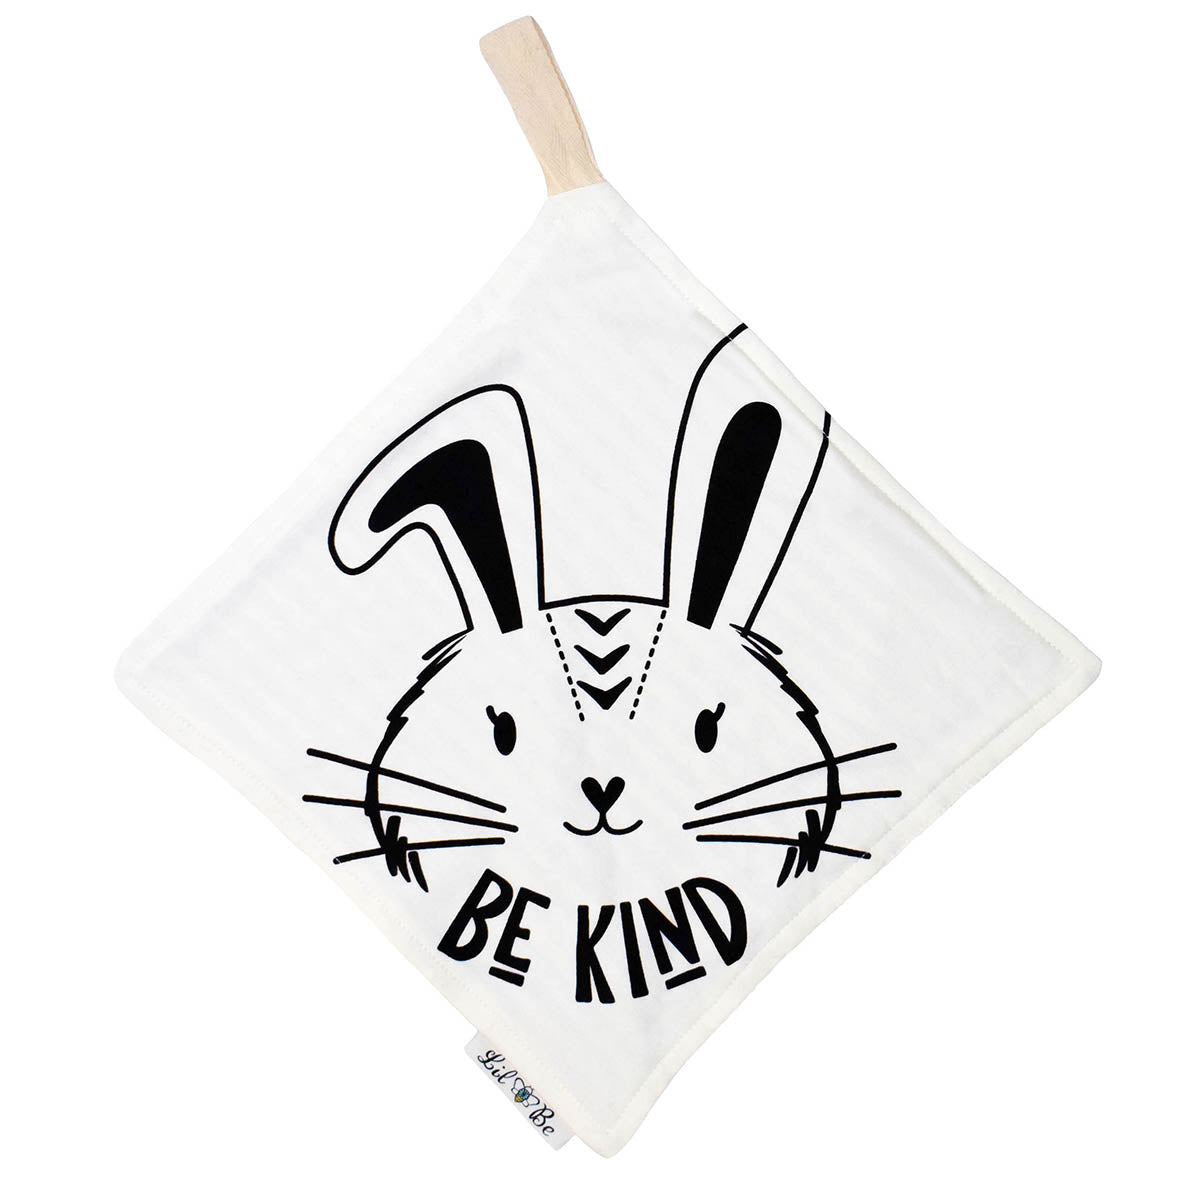 Mini Blanket with Bunny Be Kind Graphic and tag to attached to Teether